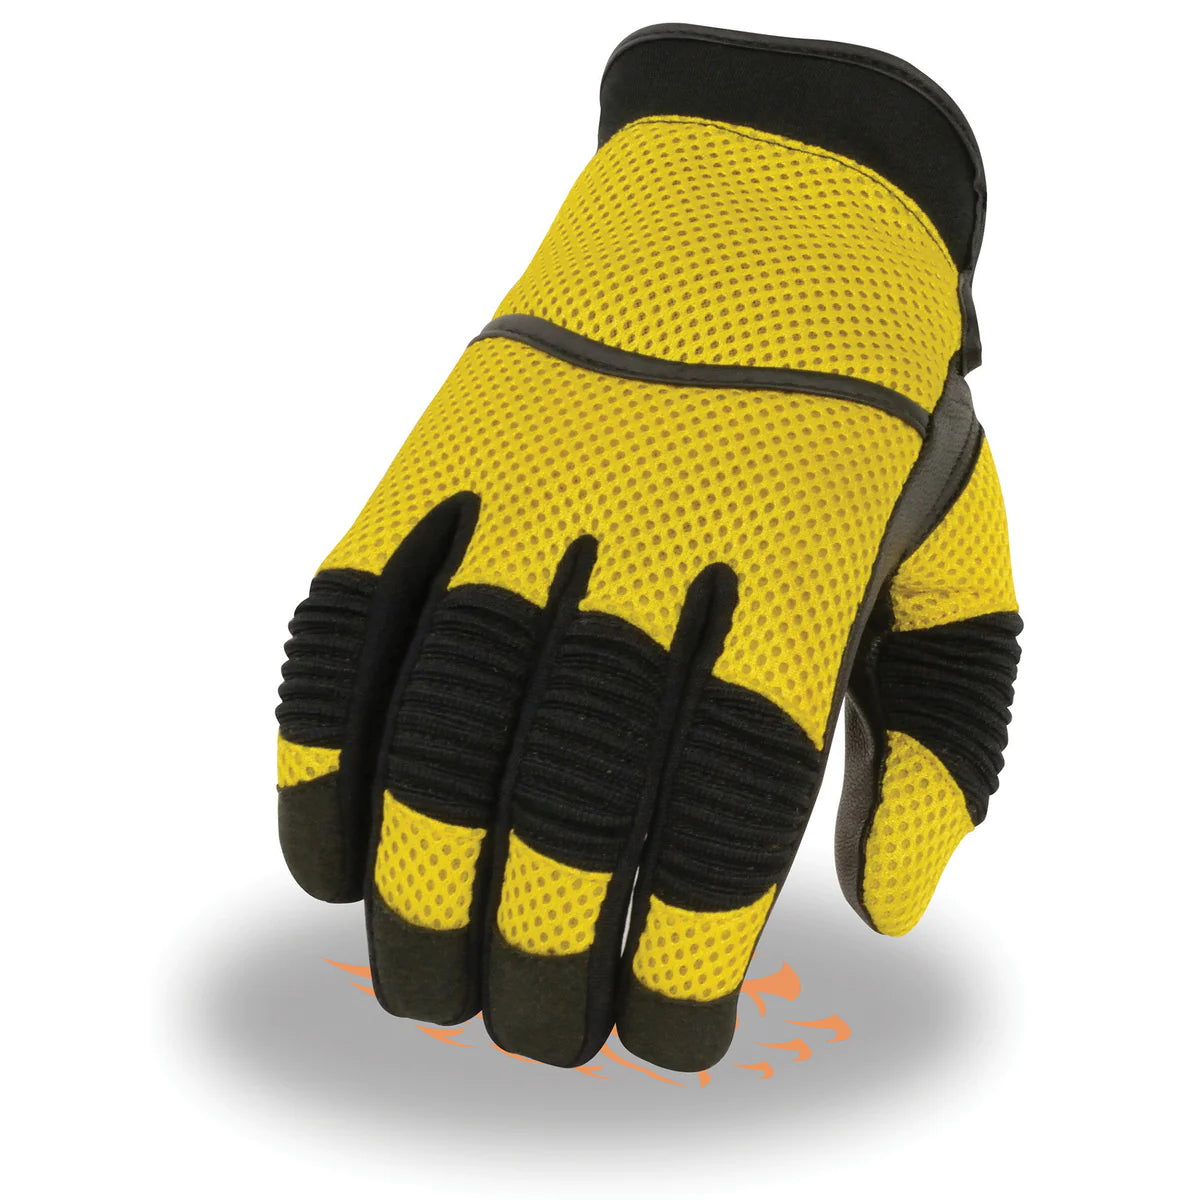 Men's Black and Yellow Mesh and Leather Racing Gloves